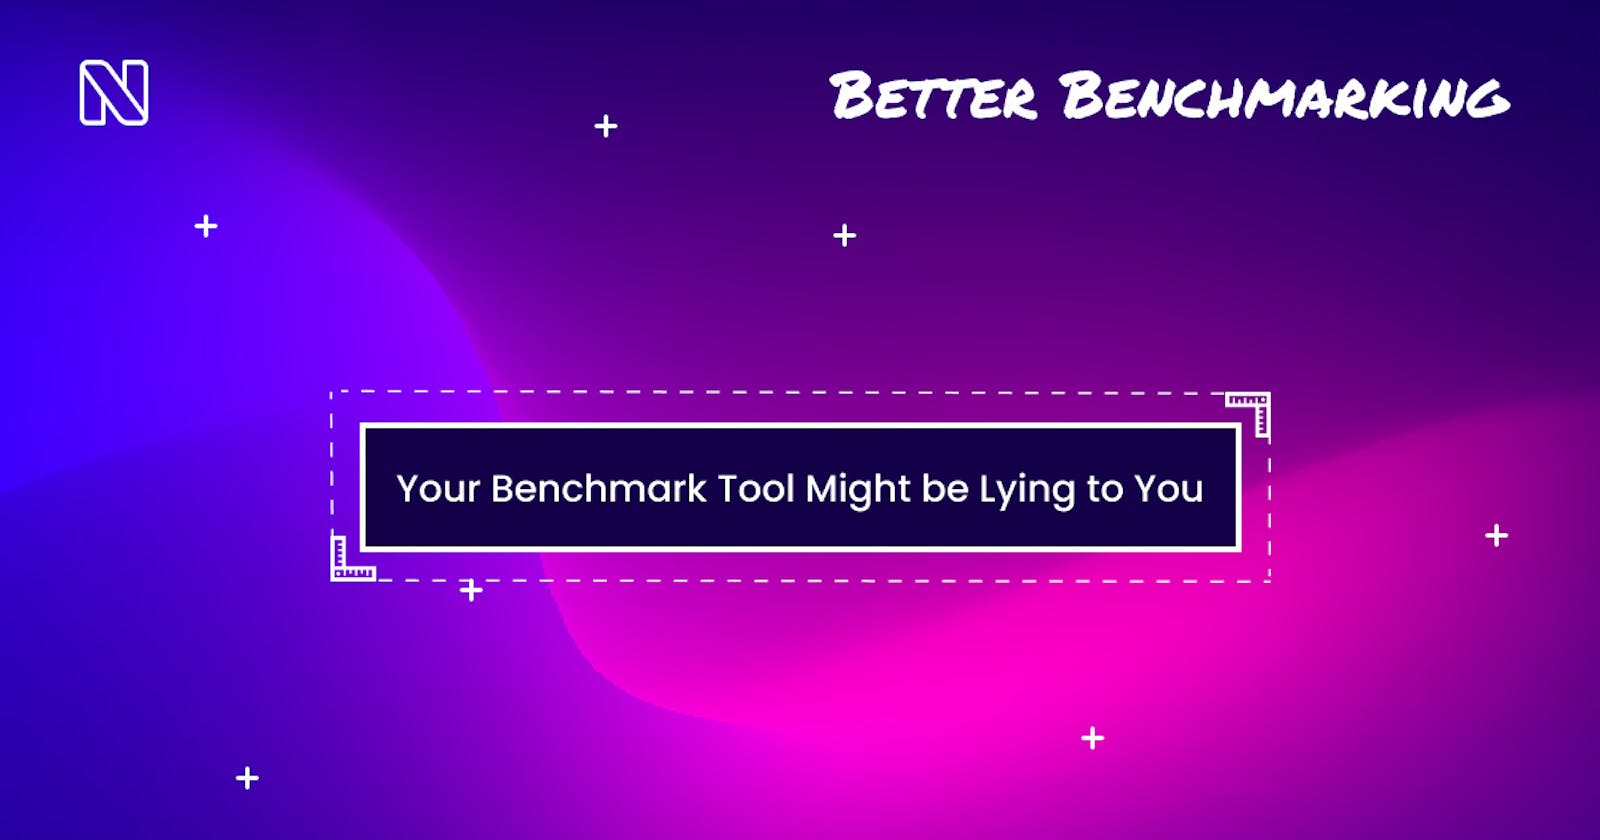 Better Benchmarking: Your Benchmark Tool Might be Lying to You